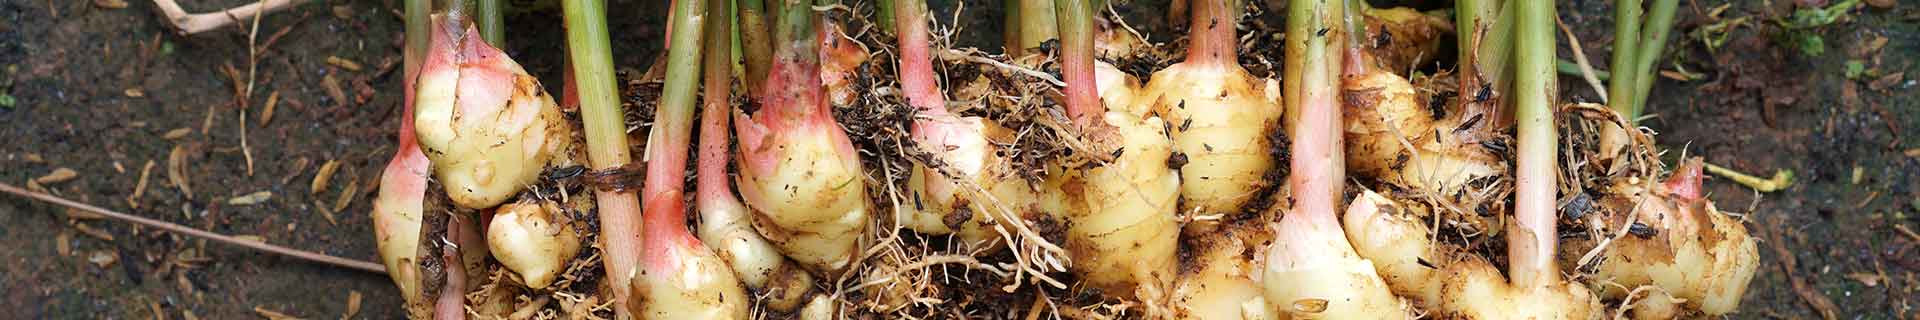 <p>How to grow ginger at home</p>
